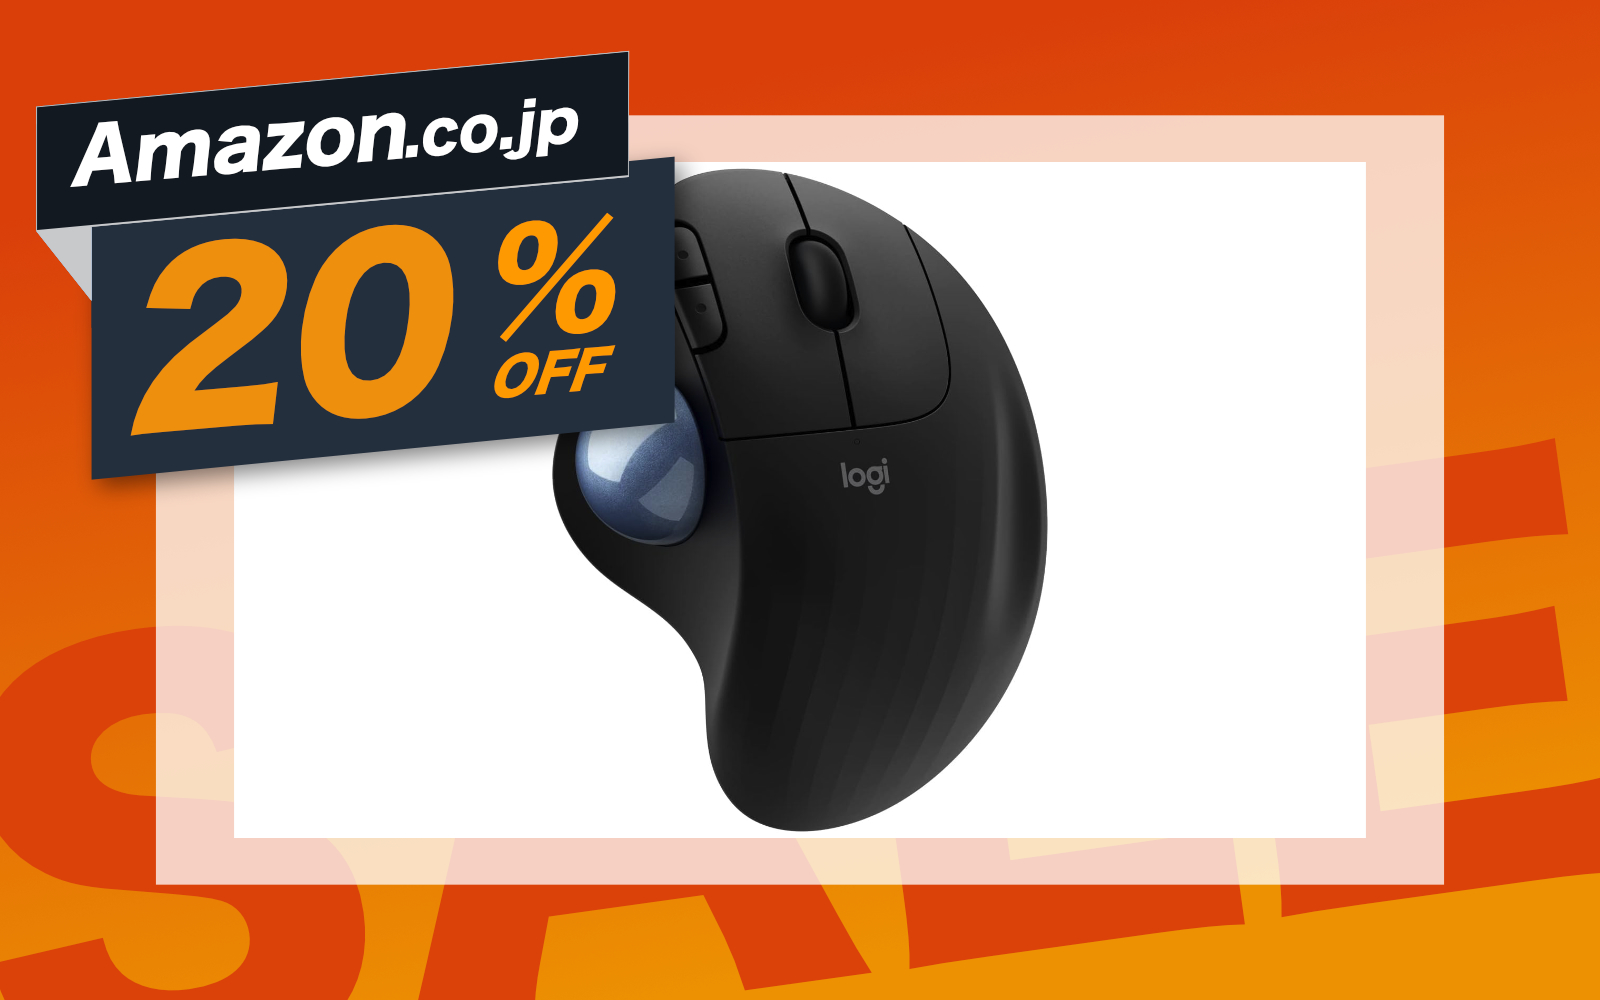 M575S mouse on sale again